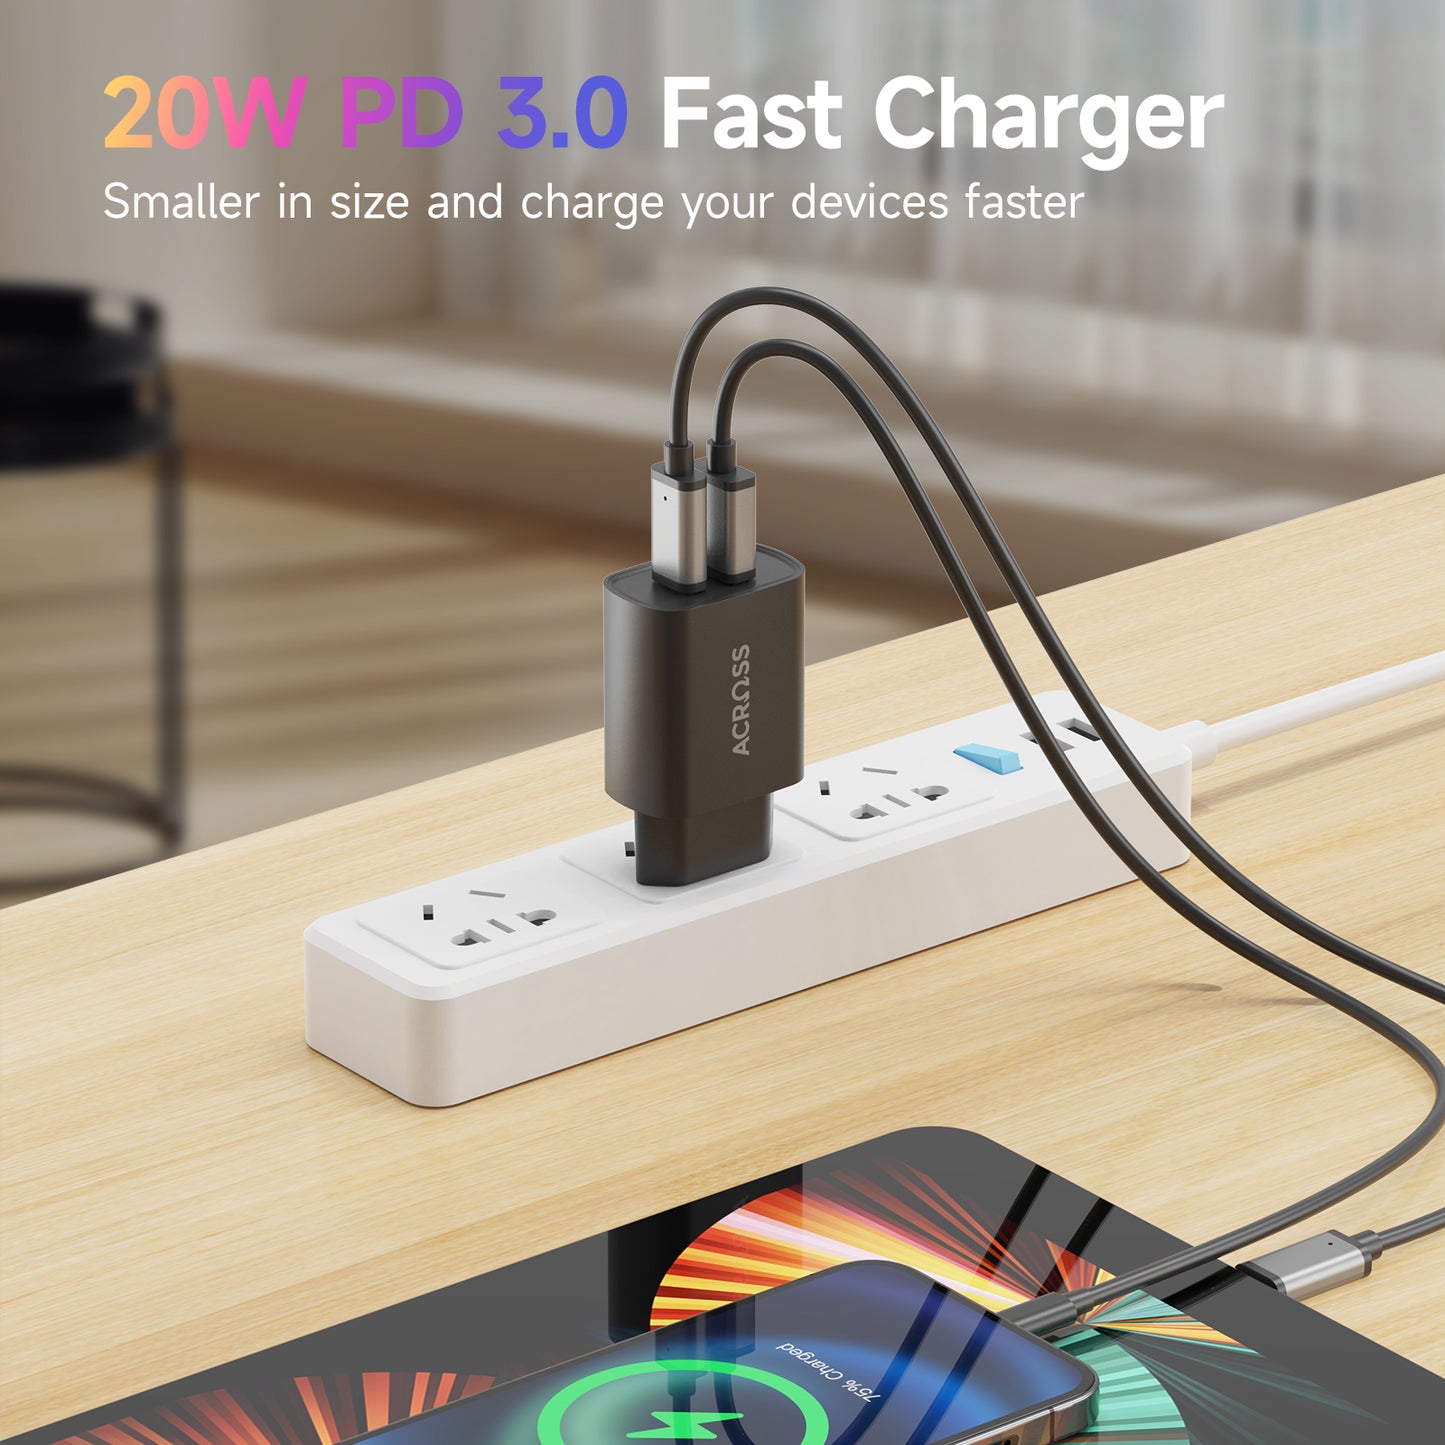 SpeedCharge 20W 2-Ports Charger with PD, QC 3.0 for iPhones, Androids, Tablets, and Nintendo Switch